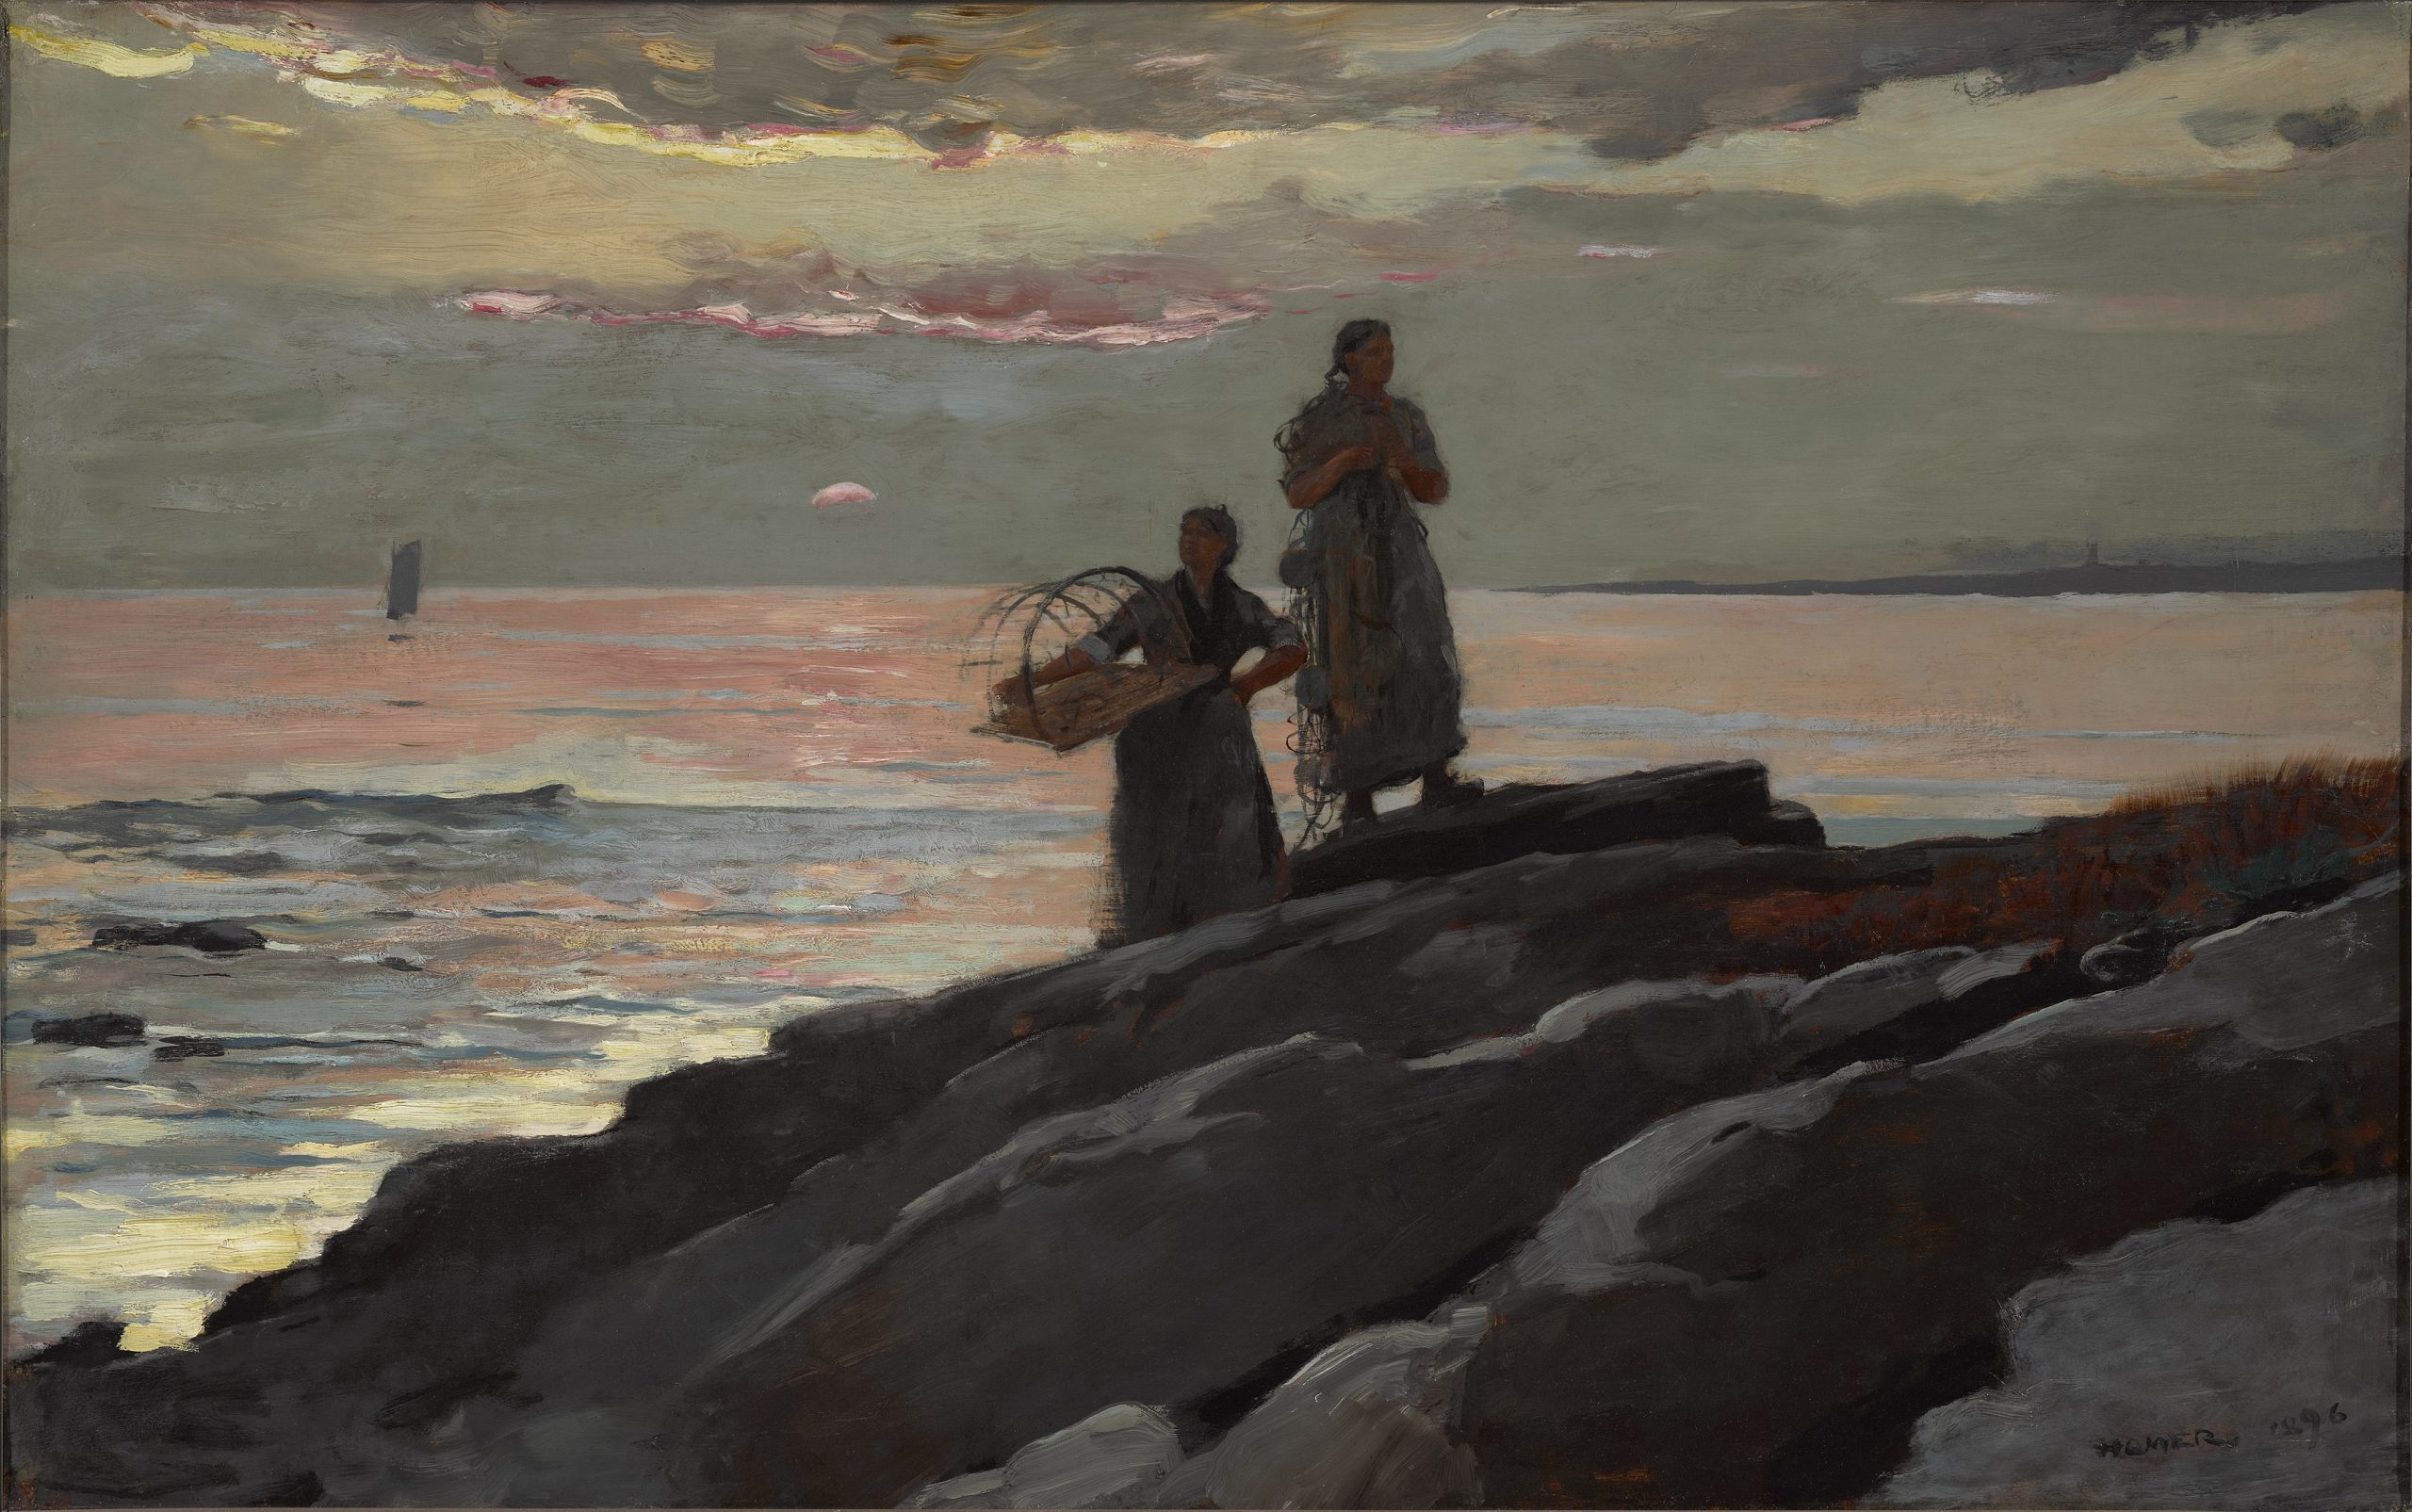 Two women carrying fishing equipment observing their surroundings on a rocky shoreline at sunset